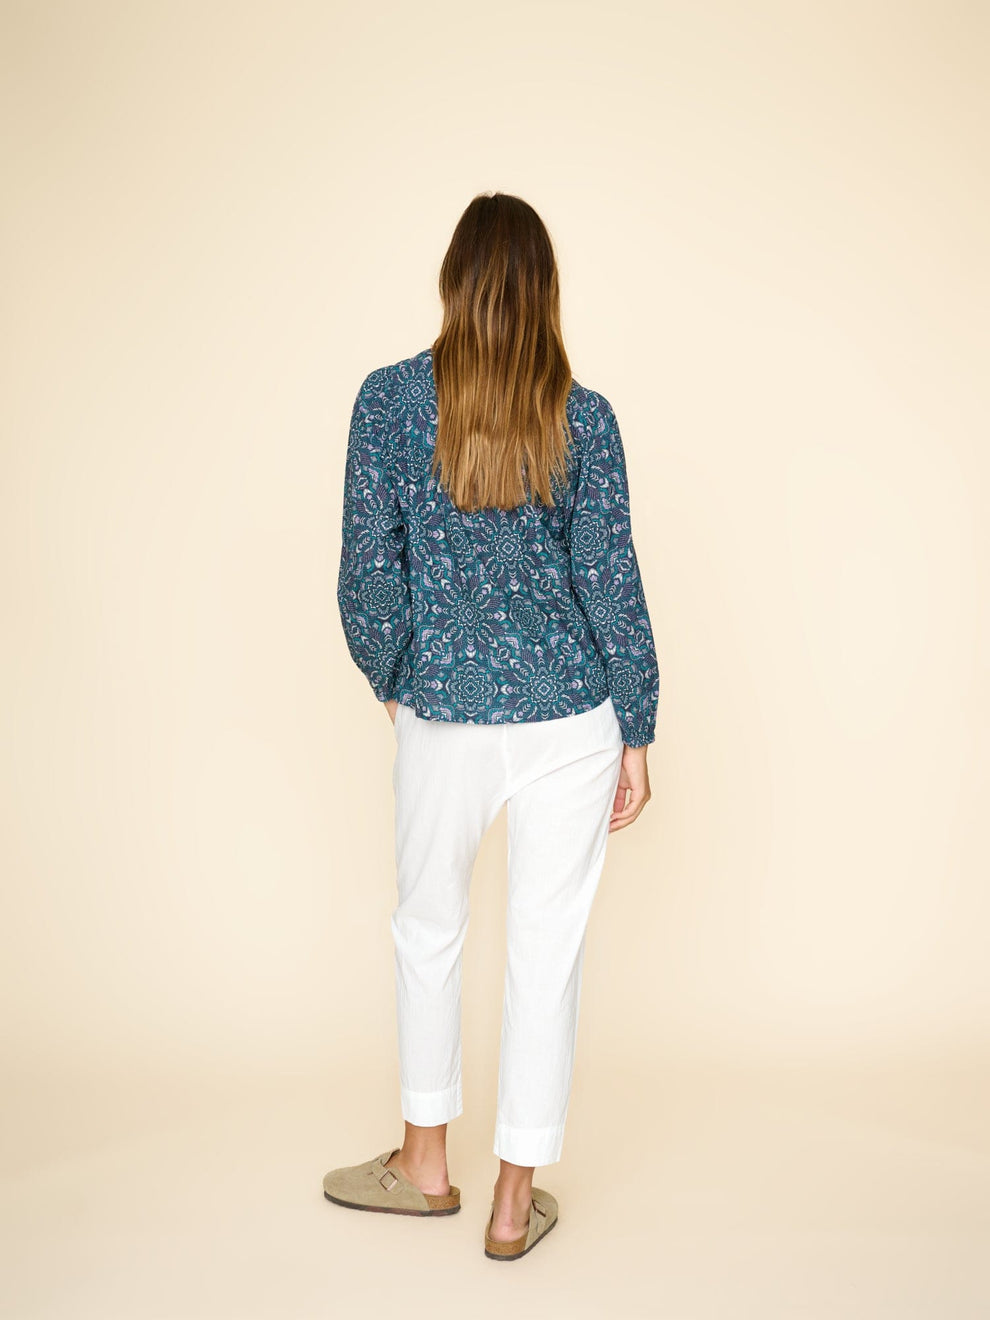 Xírena Draper Pant in White available at The New Trend